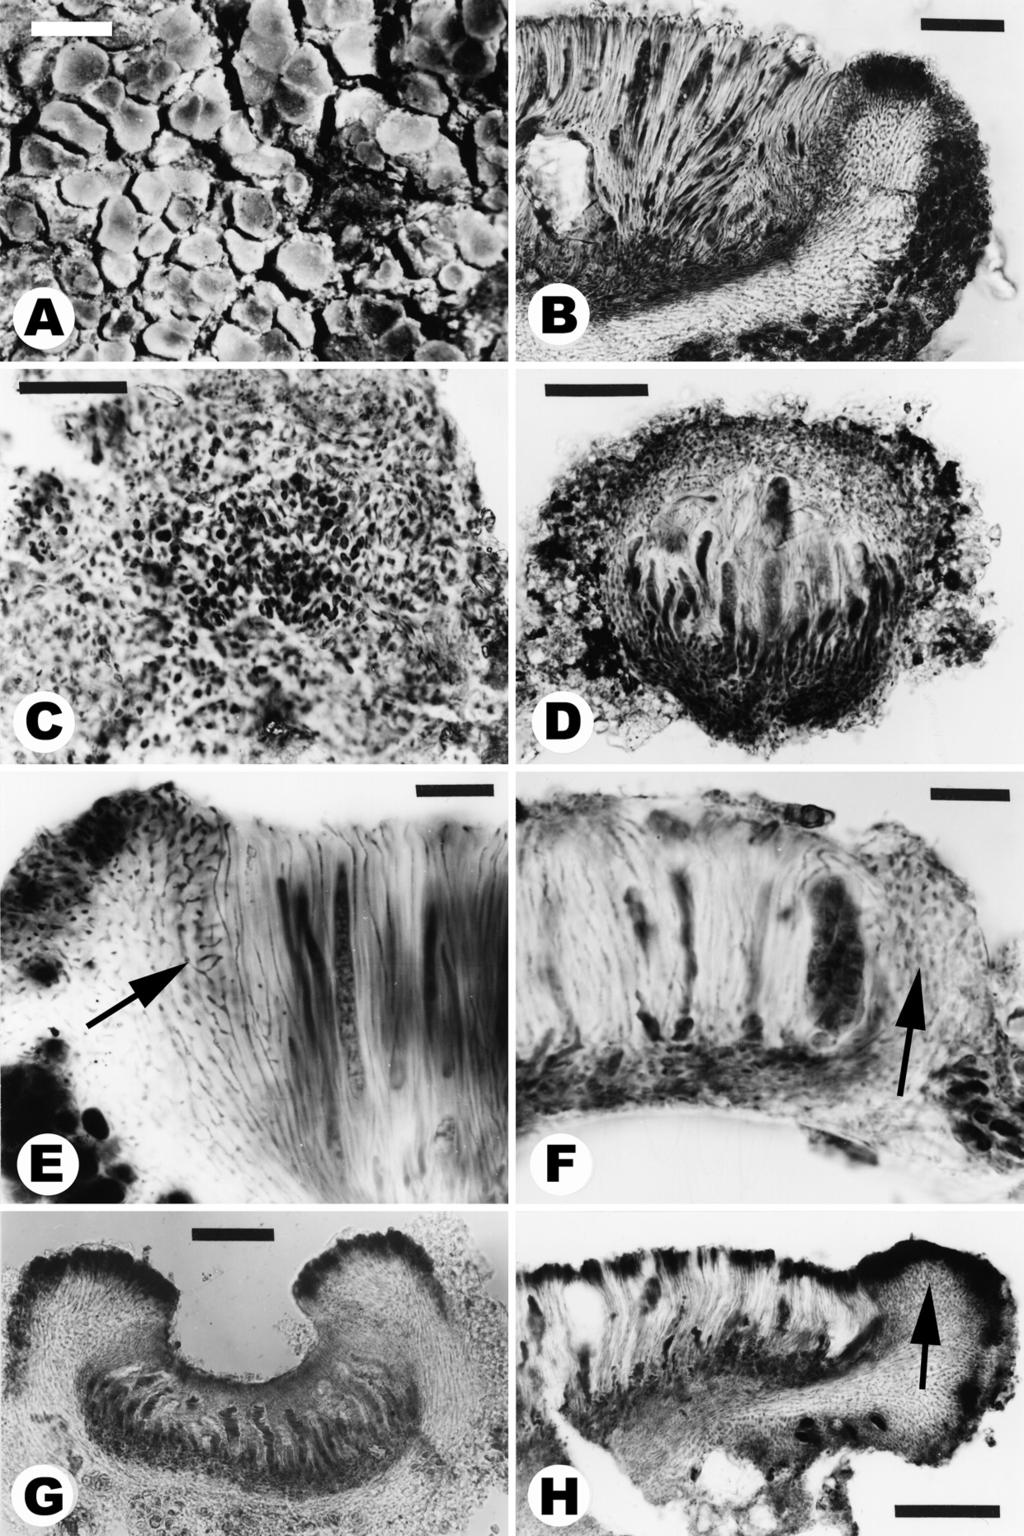 ANN. BOT. FENNICI Vol. 39 Ontogeny of Asterothyriaceae 283 Fig. 7. Apothecial anatomy and ontogeny in Gyalidea (B H microtome sections in LB). A E: Gyalidea hyalinescens.